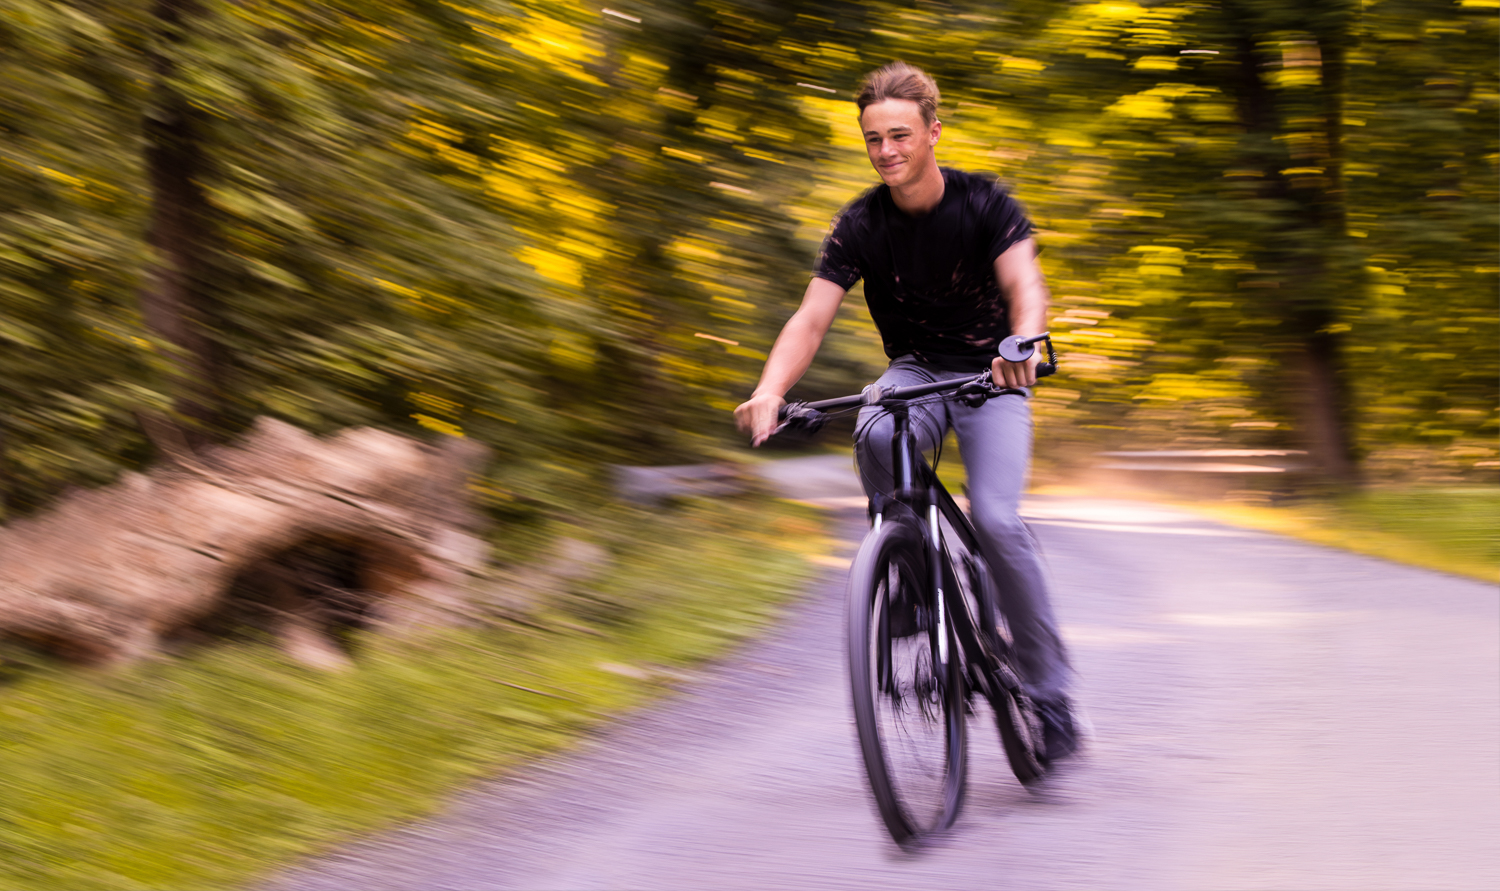 Creative Senior Portrait Photographer, rhinehart photography, captures this unique creative action shot of this senior as he rides his bike down an outdoor trail in shippensburg, pa 